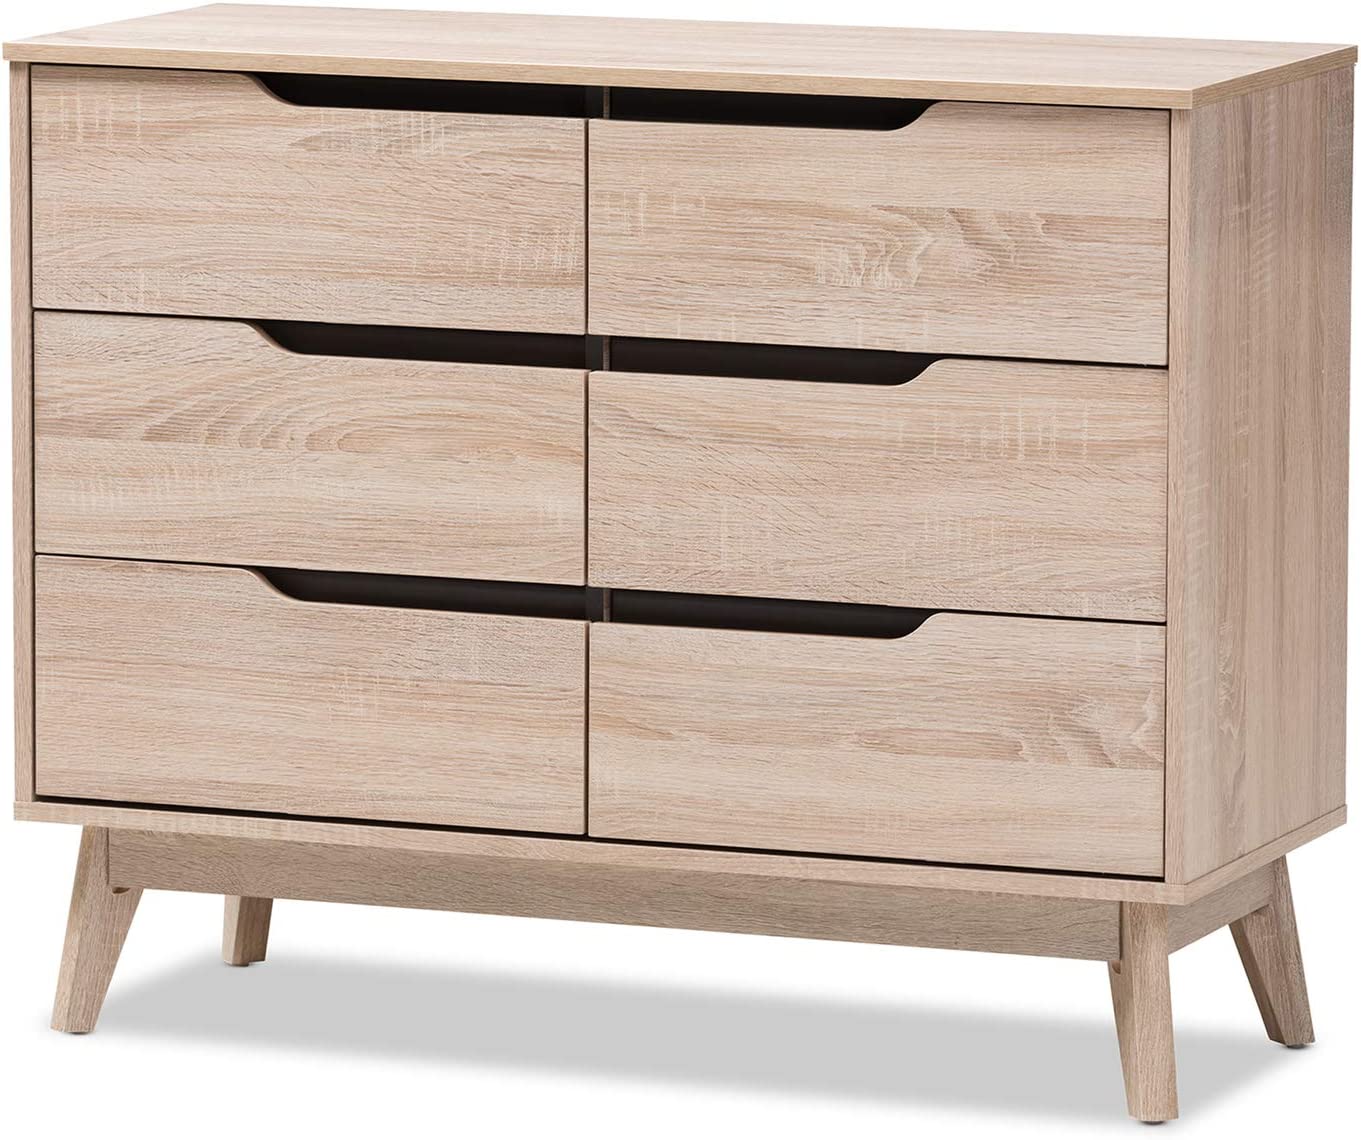 Baxton Studio Fella 6-Drawer Dresser/Mid-Century/Light Brown/Gray/Particle Board/MDF with PU Paper